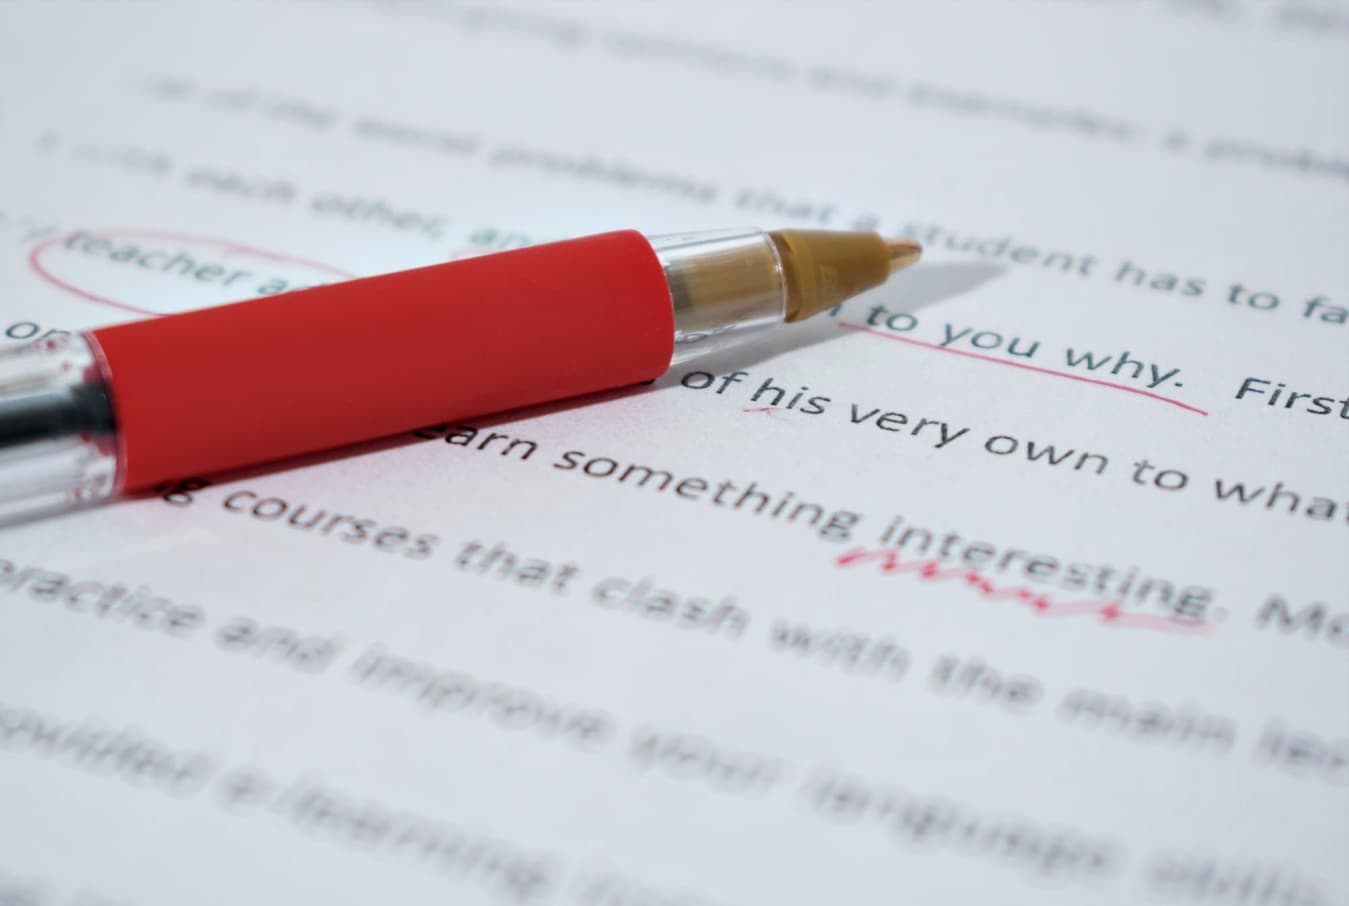 8 typical grammar mistakes students have to avoid in writing papers